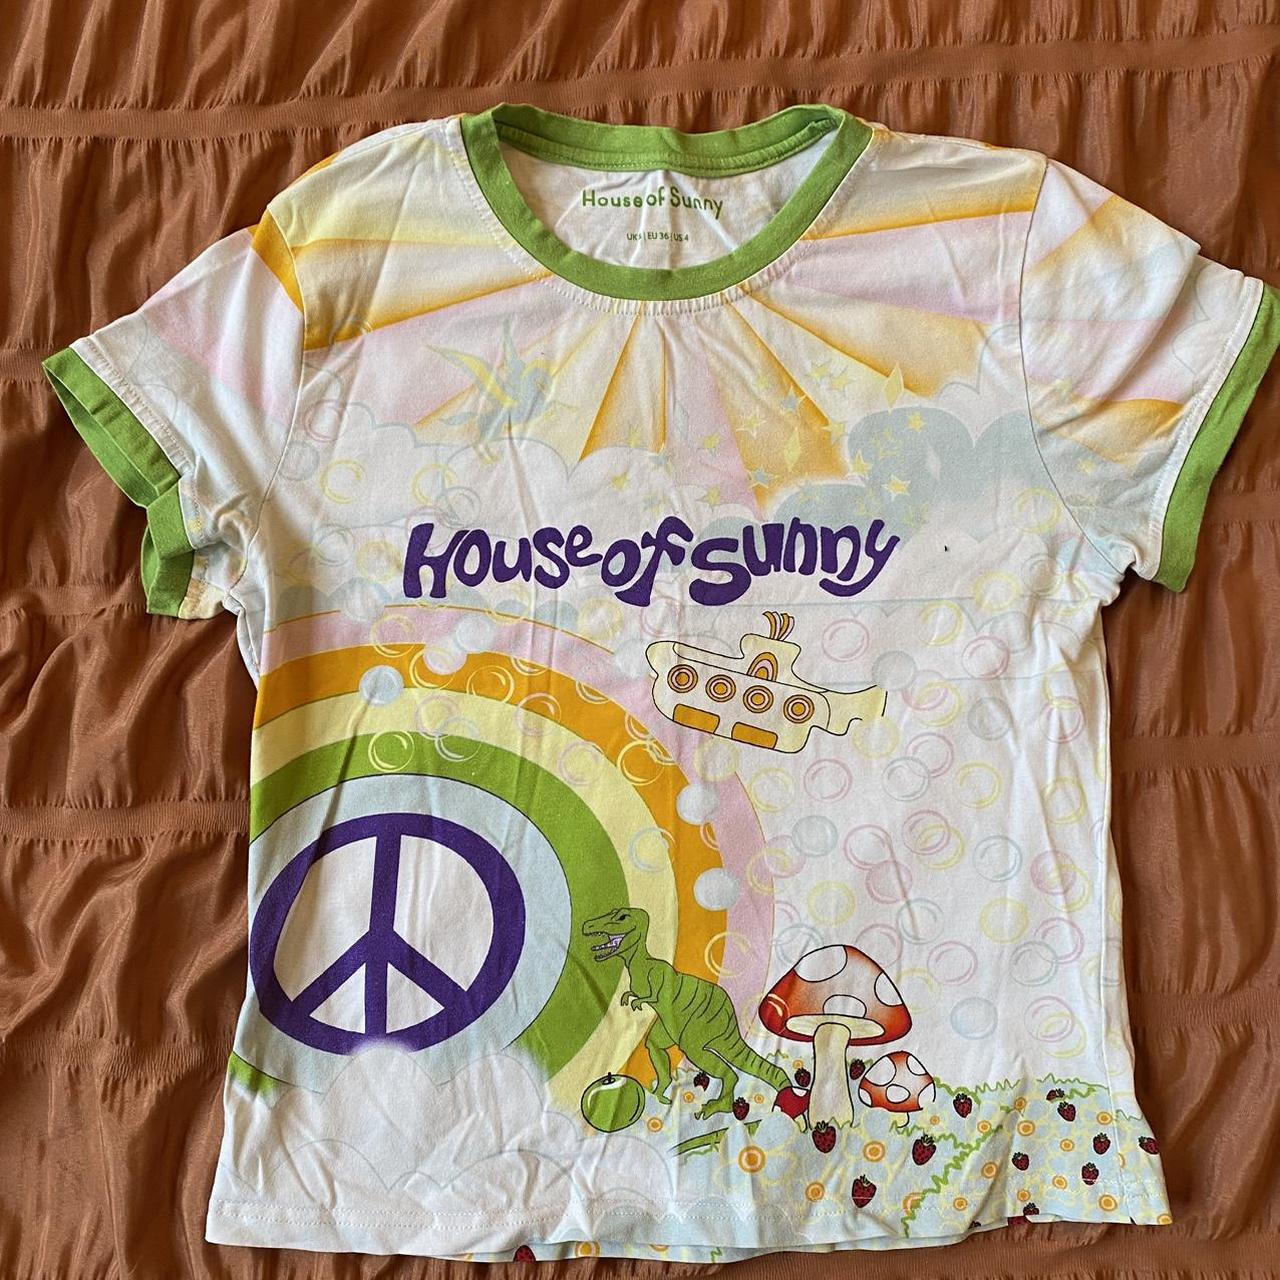 House of sunny pure imagination baby t-shirt Size... - Depop